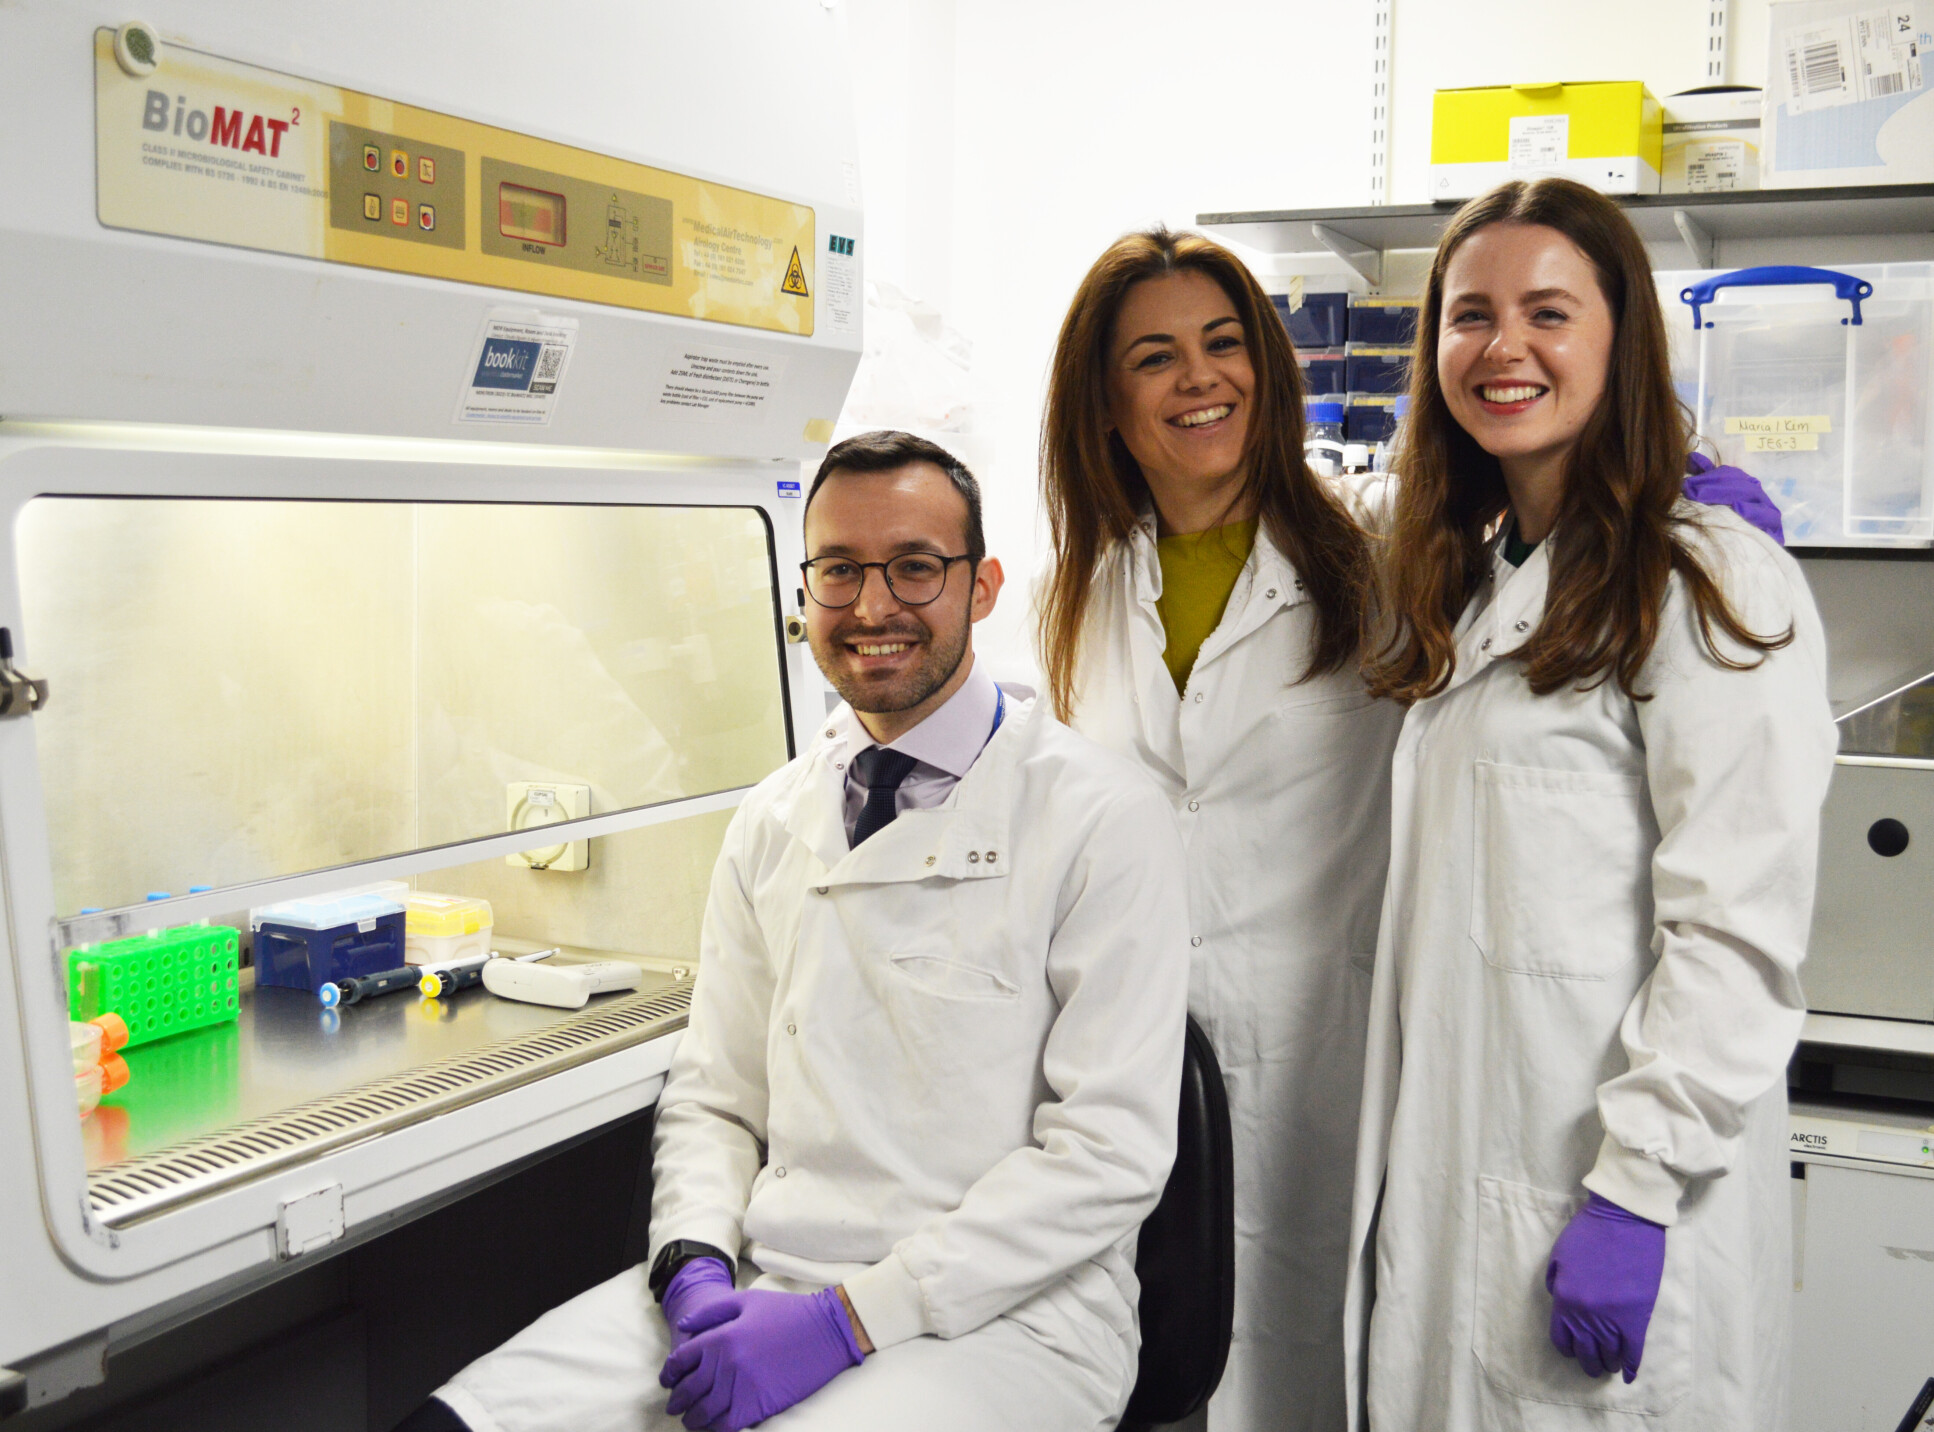 From left to right: Dr Konstantinos Kechagias, Prof Kyrgiou and Dr Laura Burney Ellis